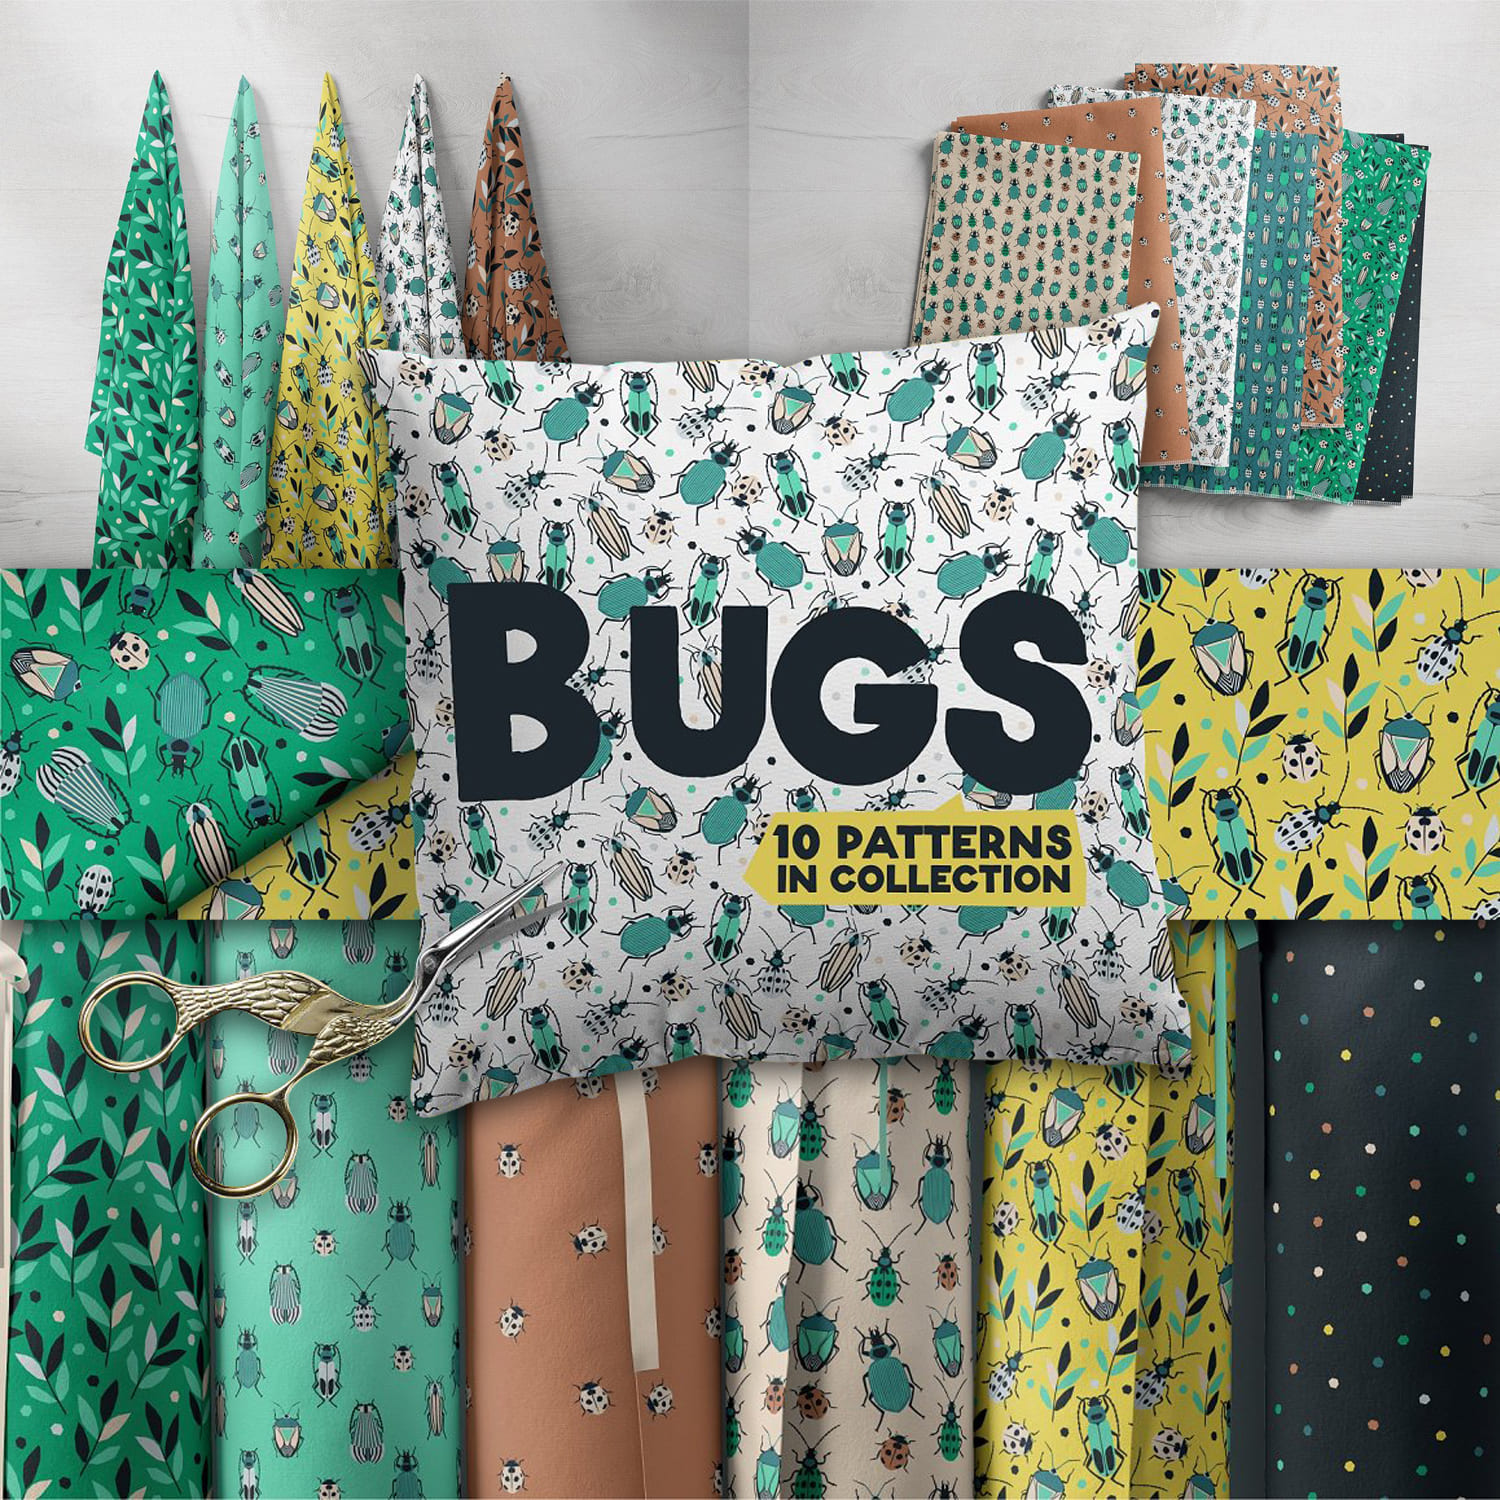 Bugs Pattern Collection cover.